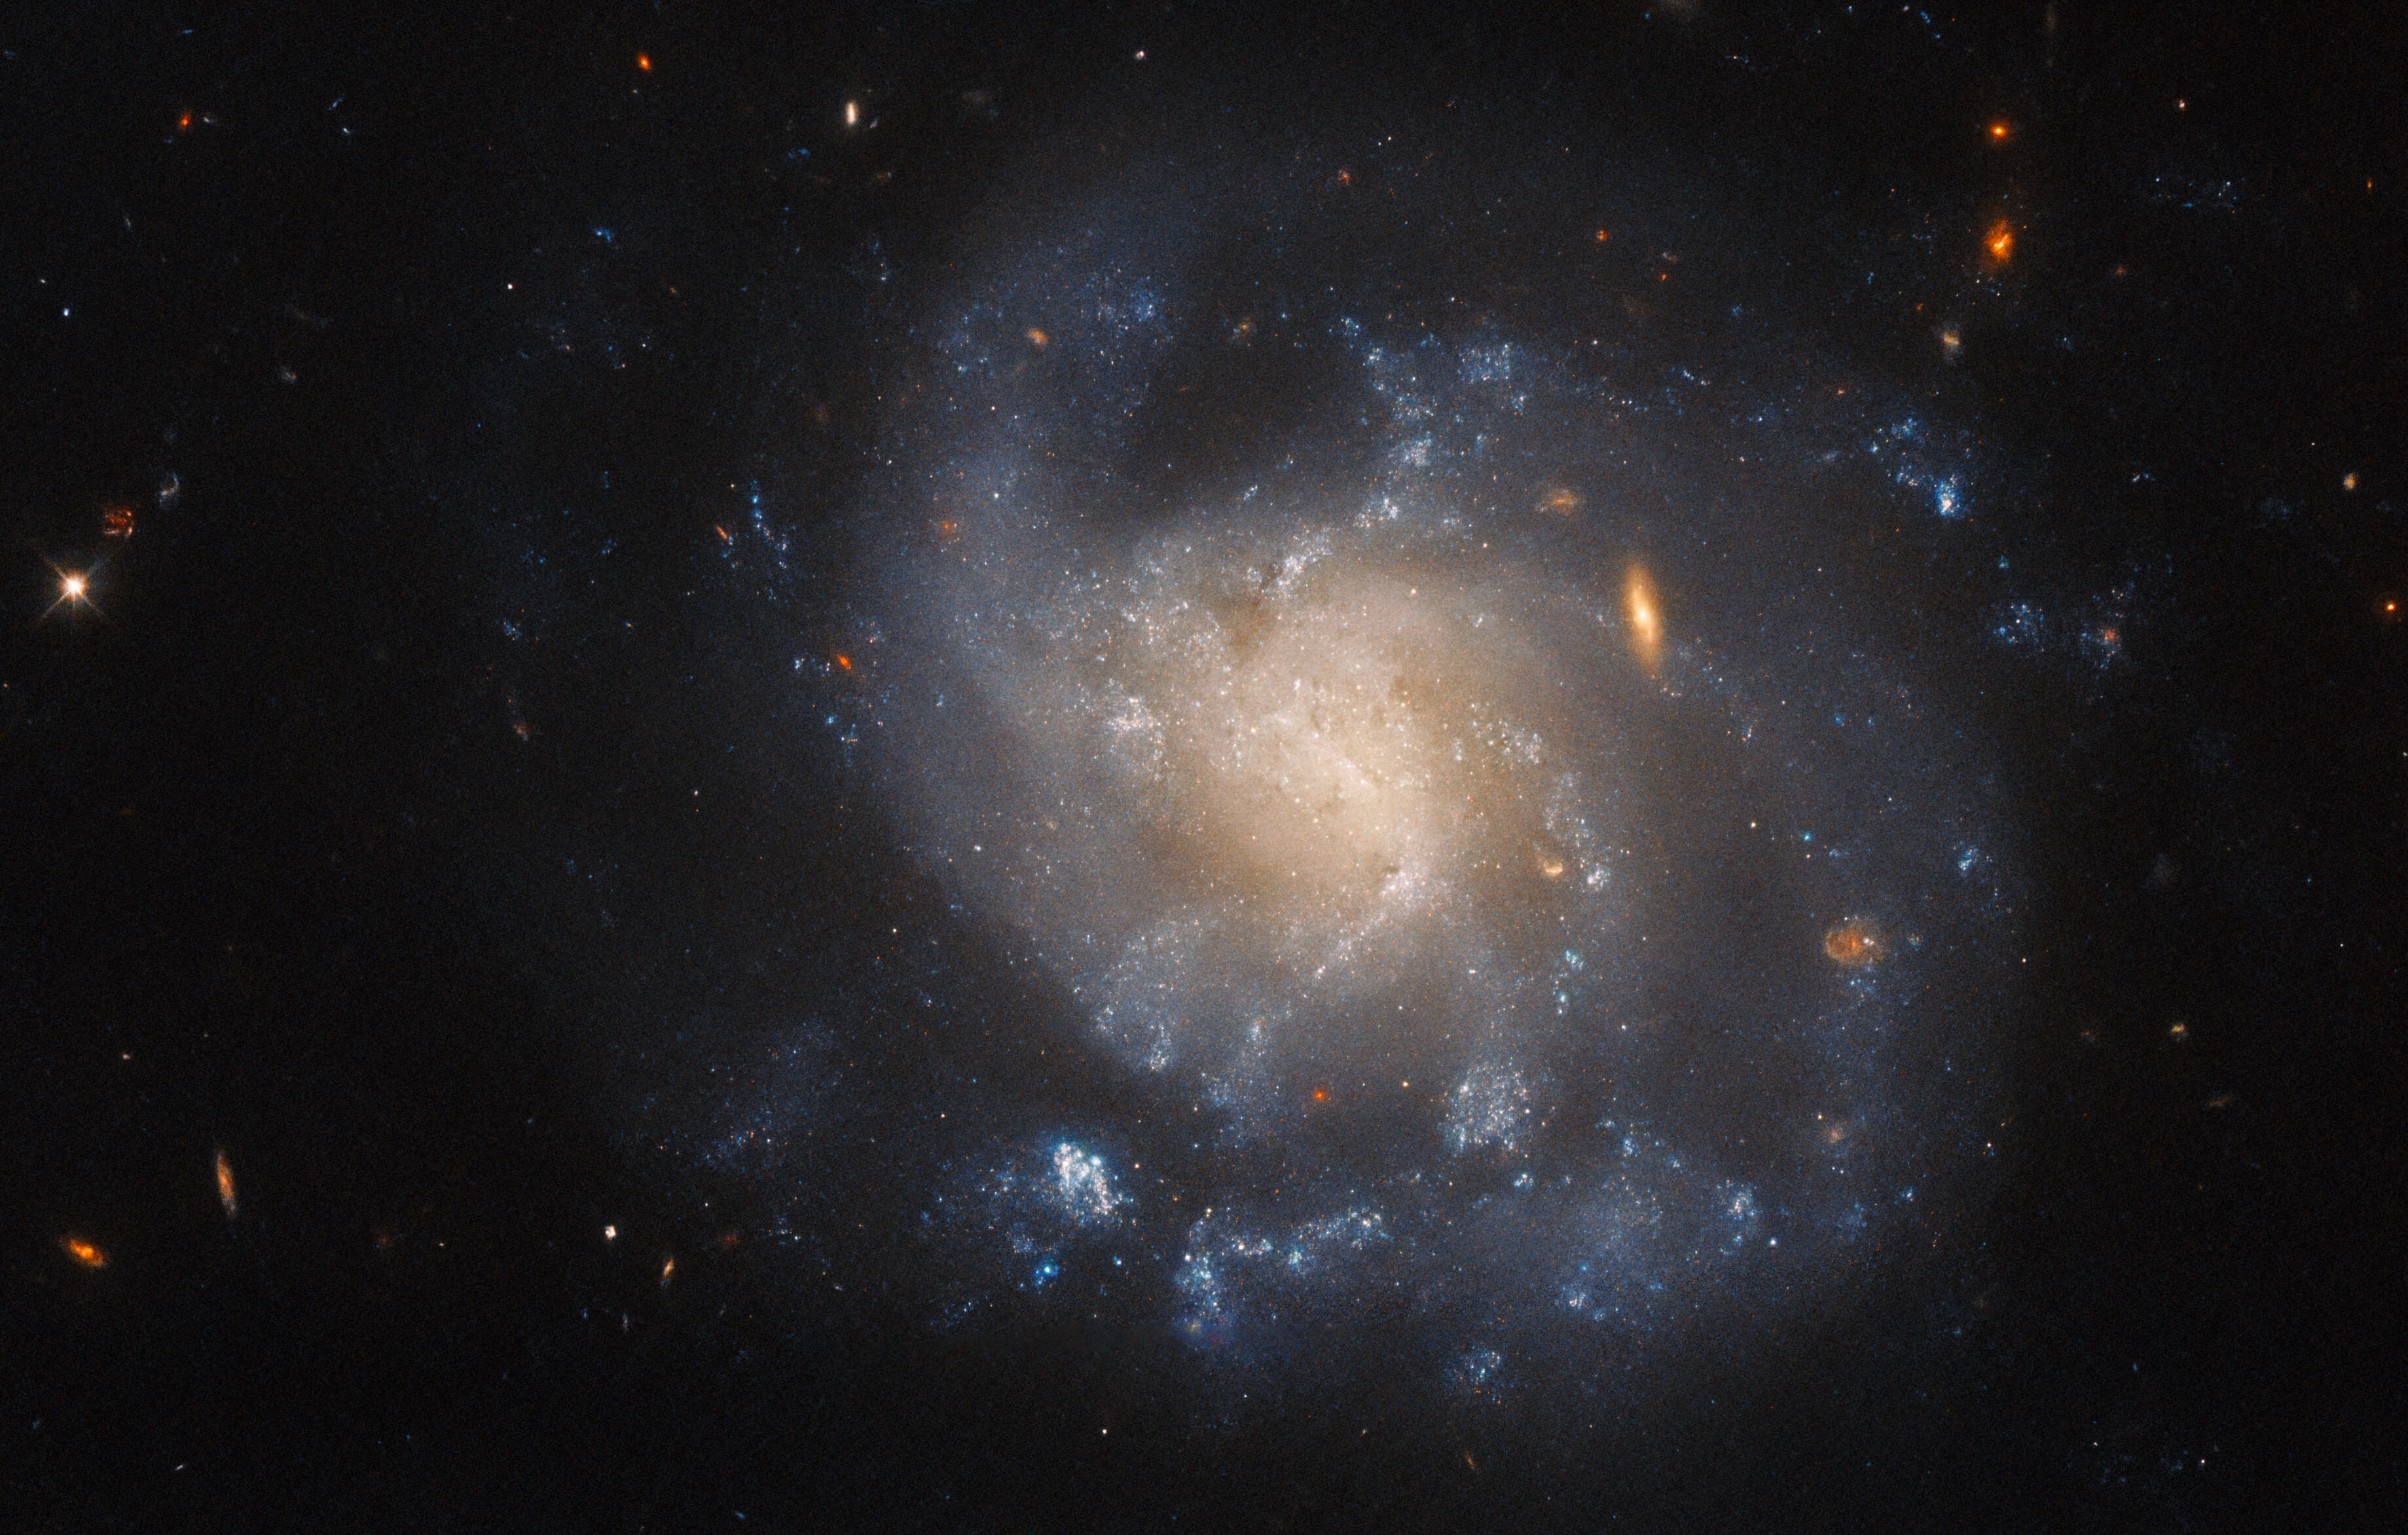 An irregularly-shaped spiral galaxy. Its spiral arms are difficult to distinguish. The edges are faint, and the core has a pale-yellow glow. It is dotted with small, wispy, blue regions where stars are forming. A few stars and small galaxies in warm colors are visible around it.